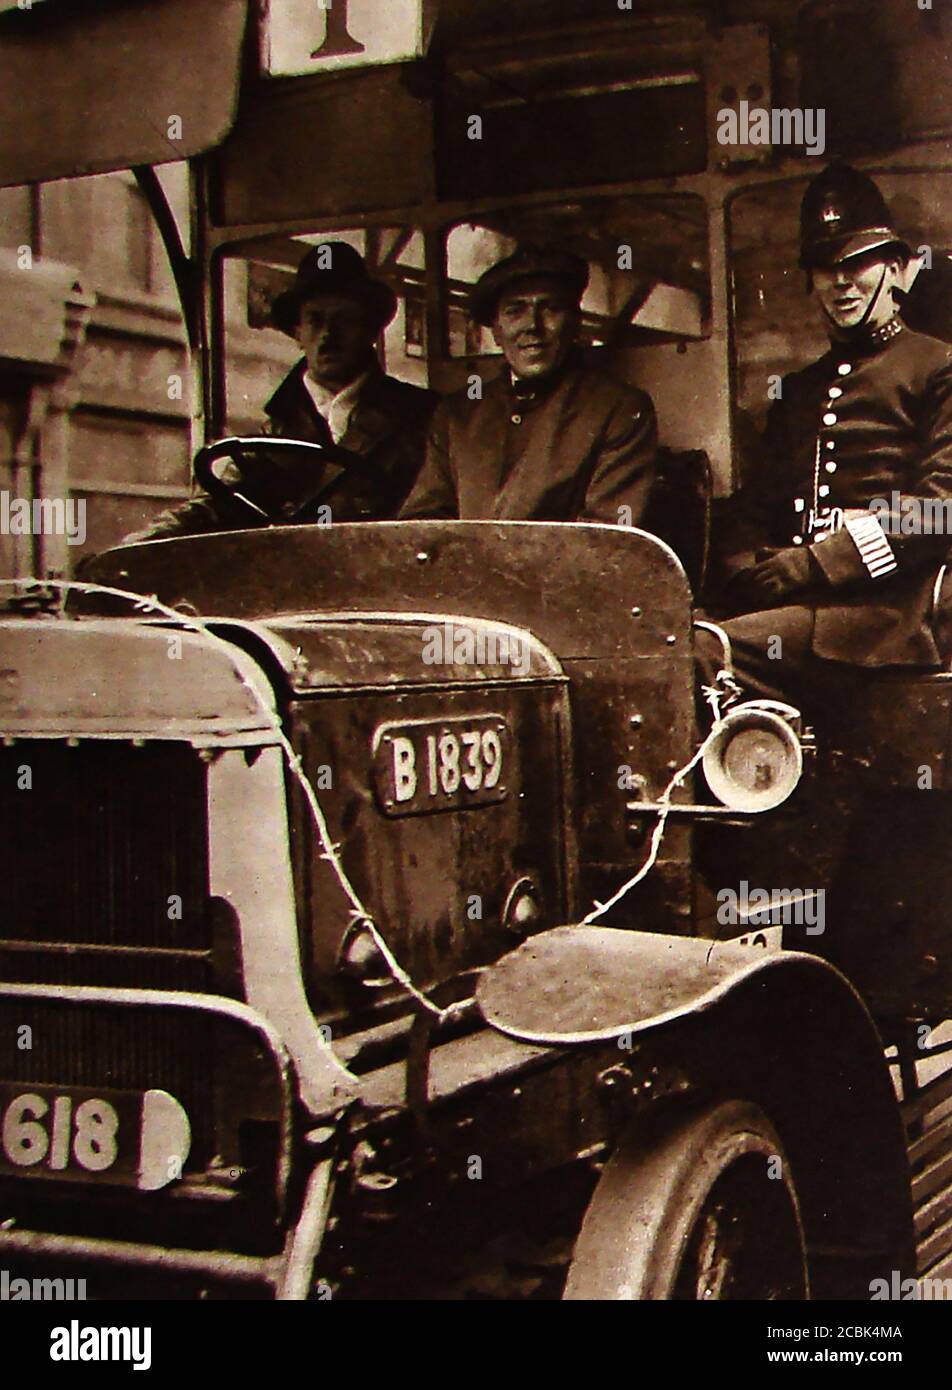 General stoppage / strike  in support of  UK miners - May 1926. This old photograph shows a British Bobby (policeman) guarding the staff of a strike breaking bus . The strike lasted nine days, from 4 to 12 May 1926, having been called by   the General Council of the Trades Union Congress (TUC) in an unsuccessful attempt to force the British government to improve work and wage conditions for coal miners . Stock Photo